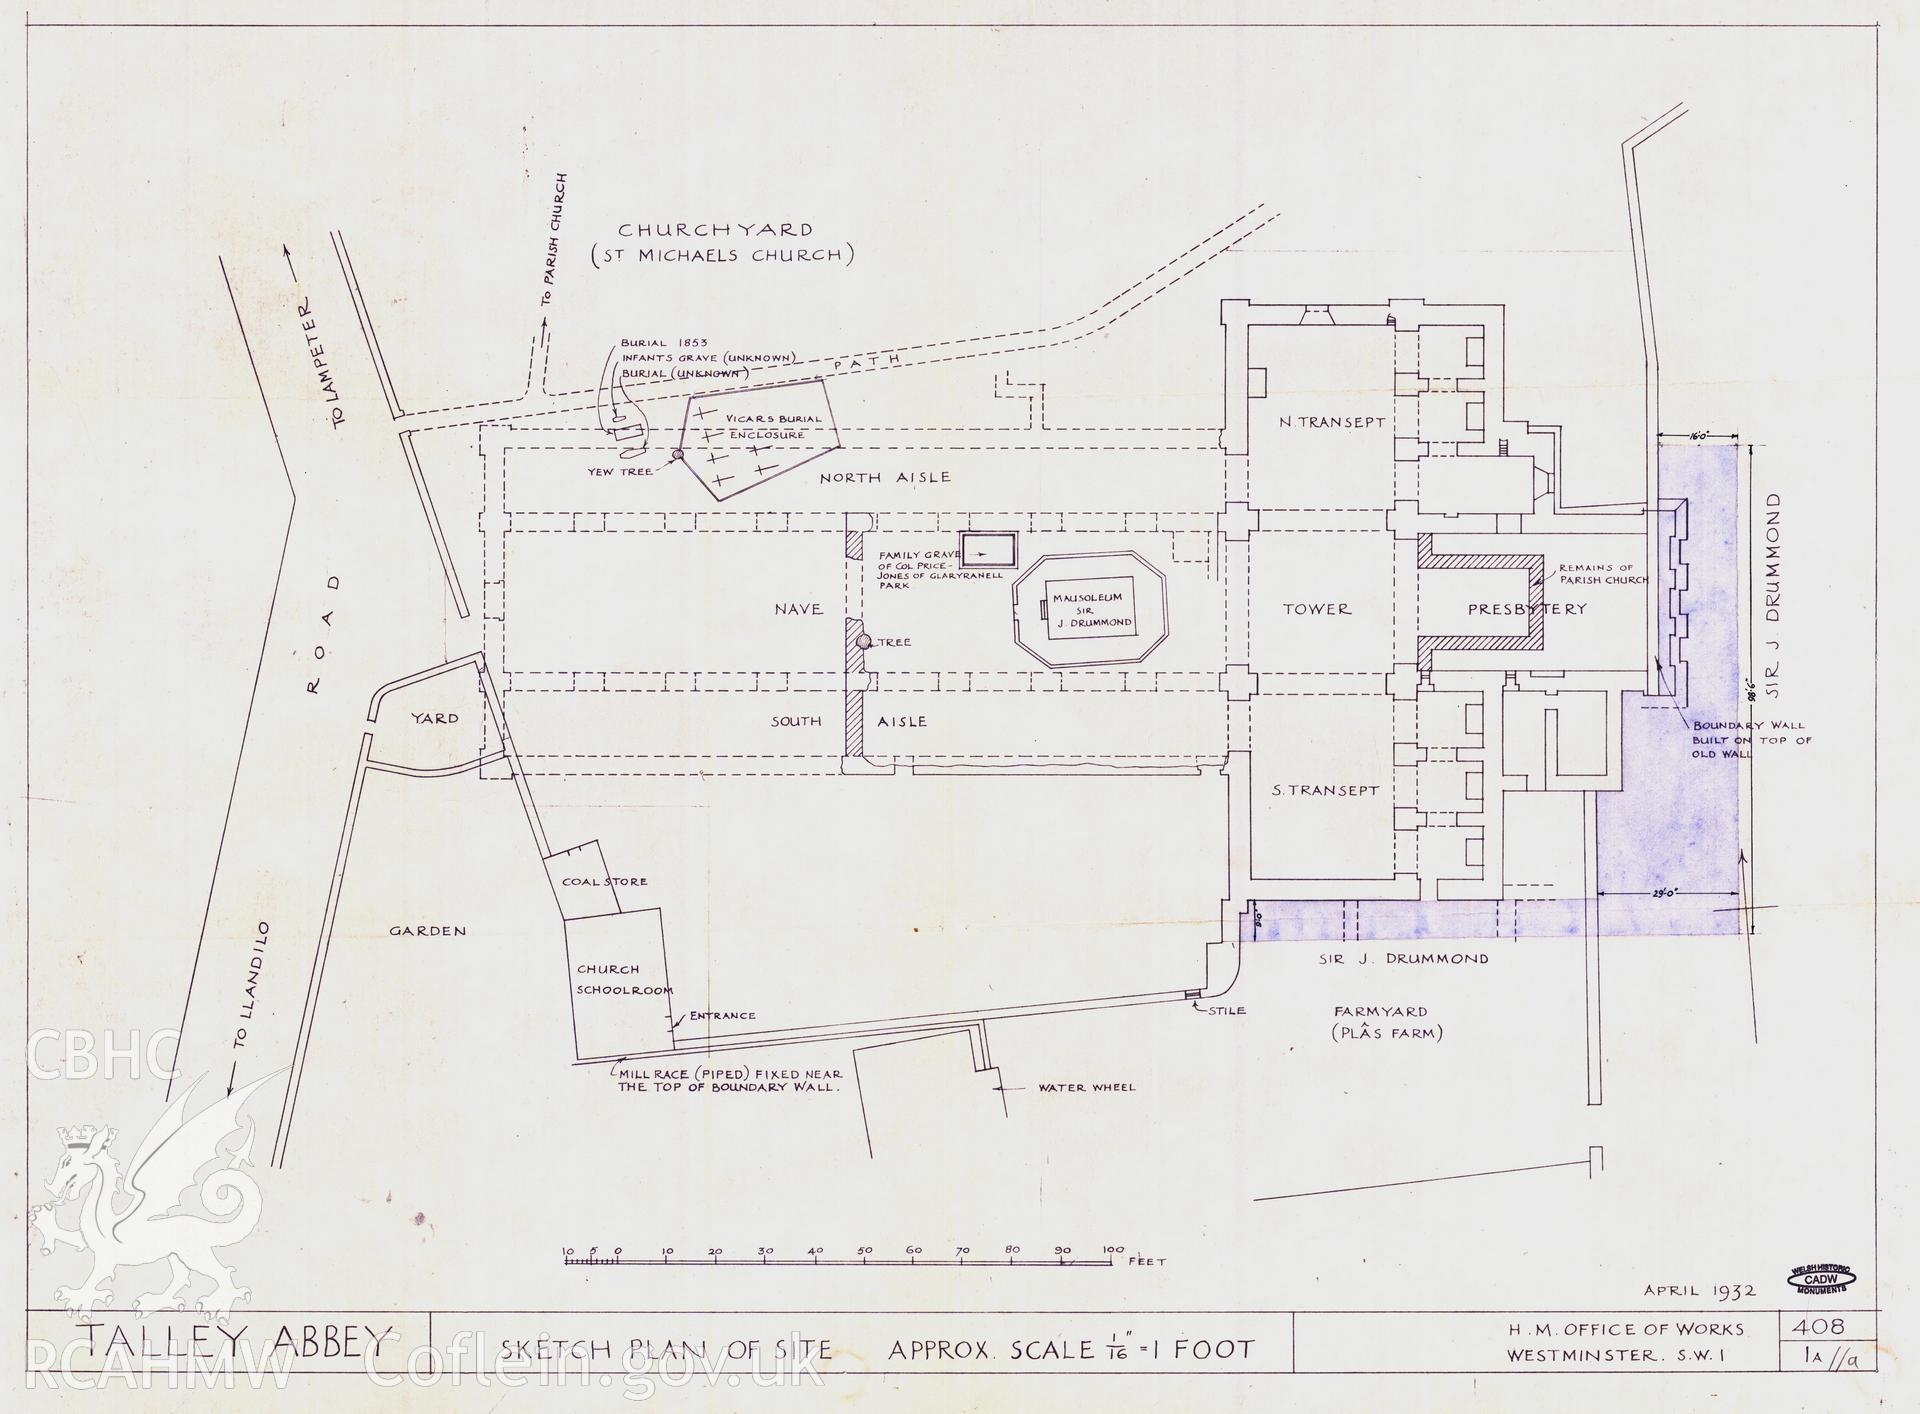 Cadw guardianship monument drawing of Talley Abbey. Sketch plan of site. Cadw Ref. No. 408/1A//a. Scale 1:192.